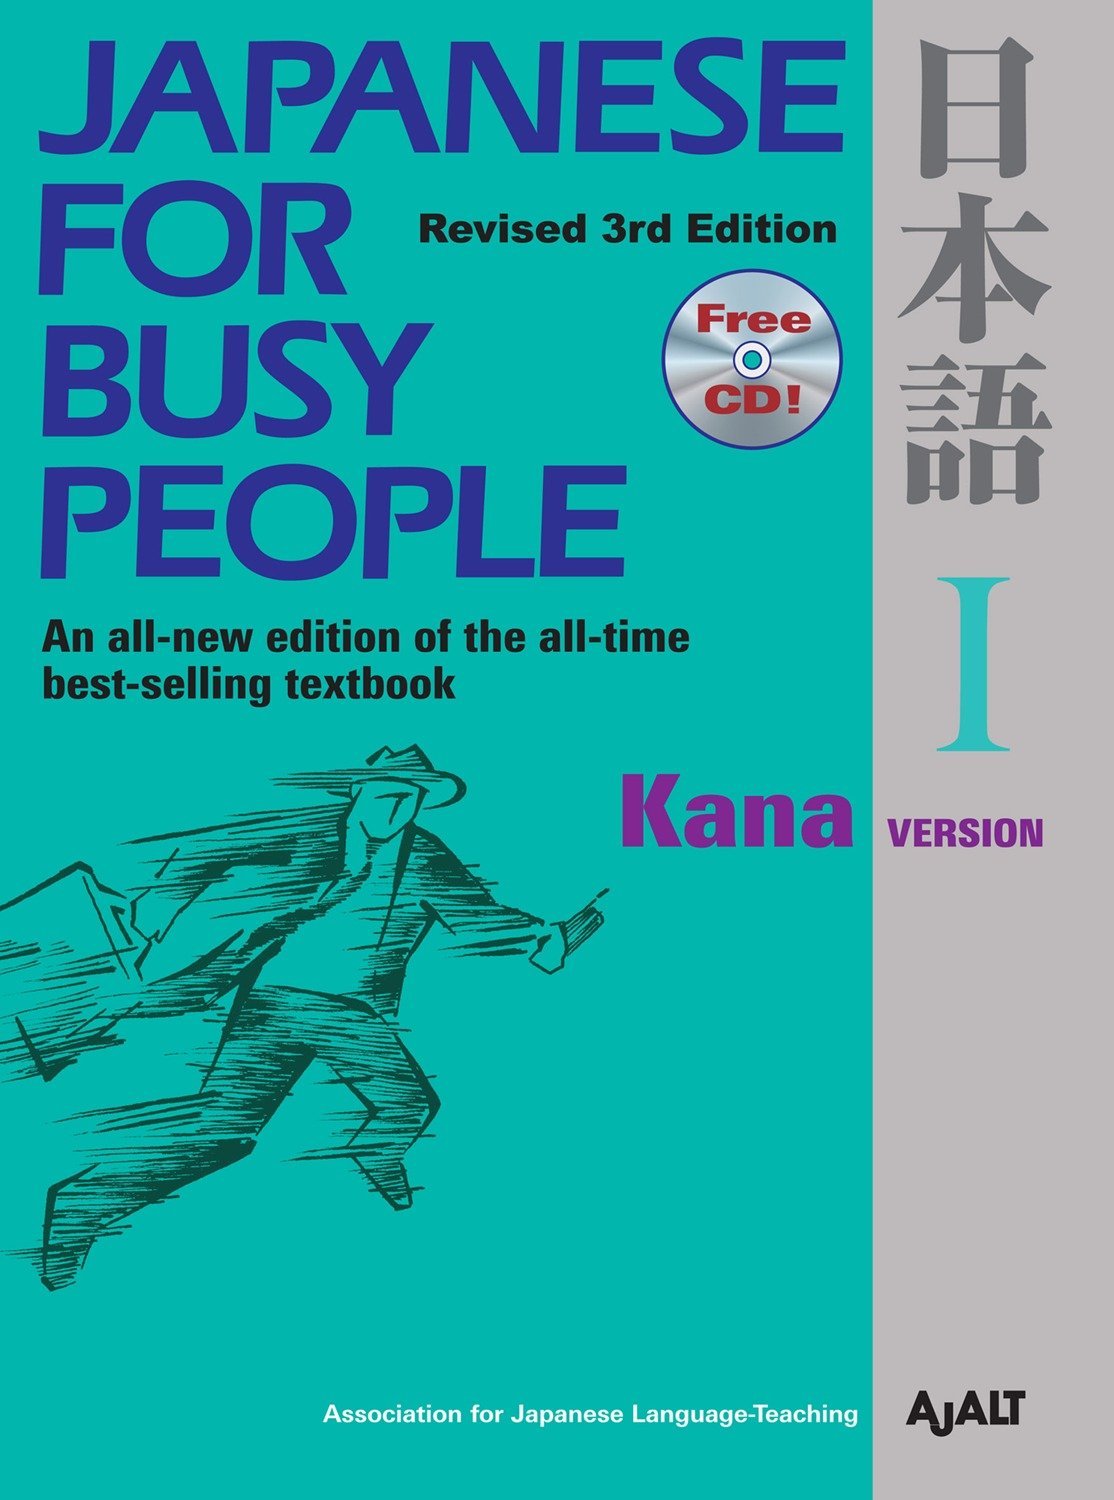 Kana　I:　–　People　for　Japanese　Busy　for　Ser　Version　Busy　People　Language　(Japanese　PanAmerican